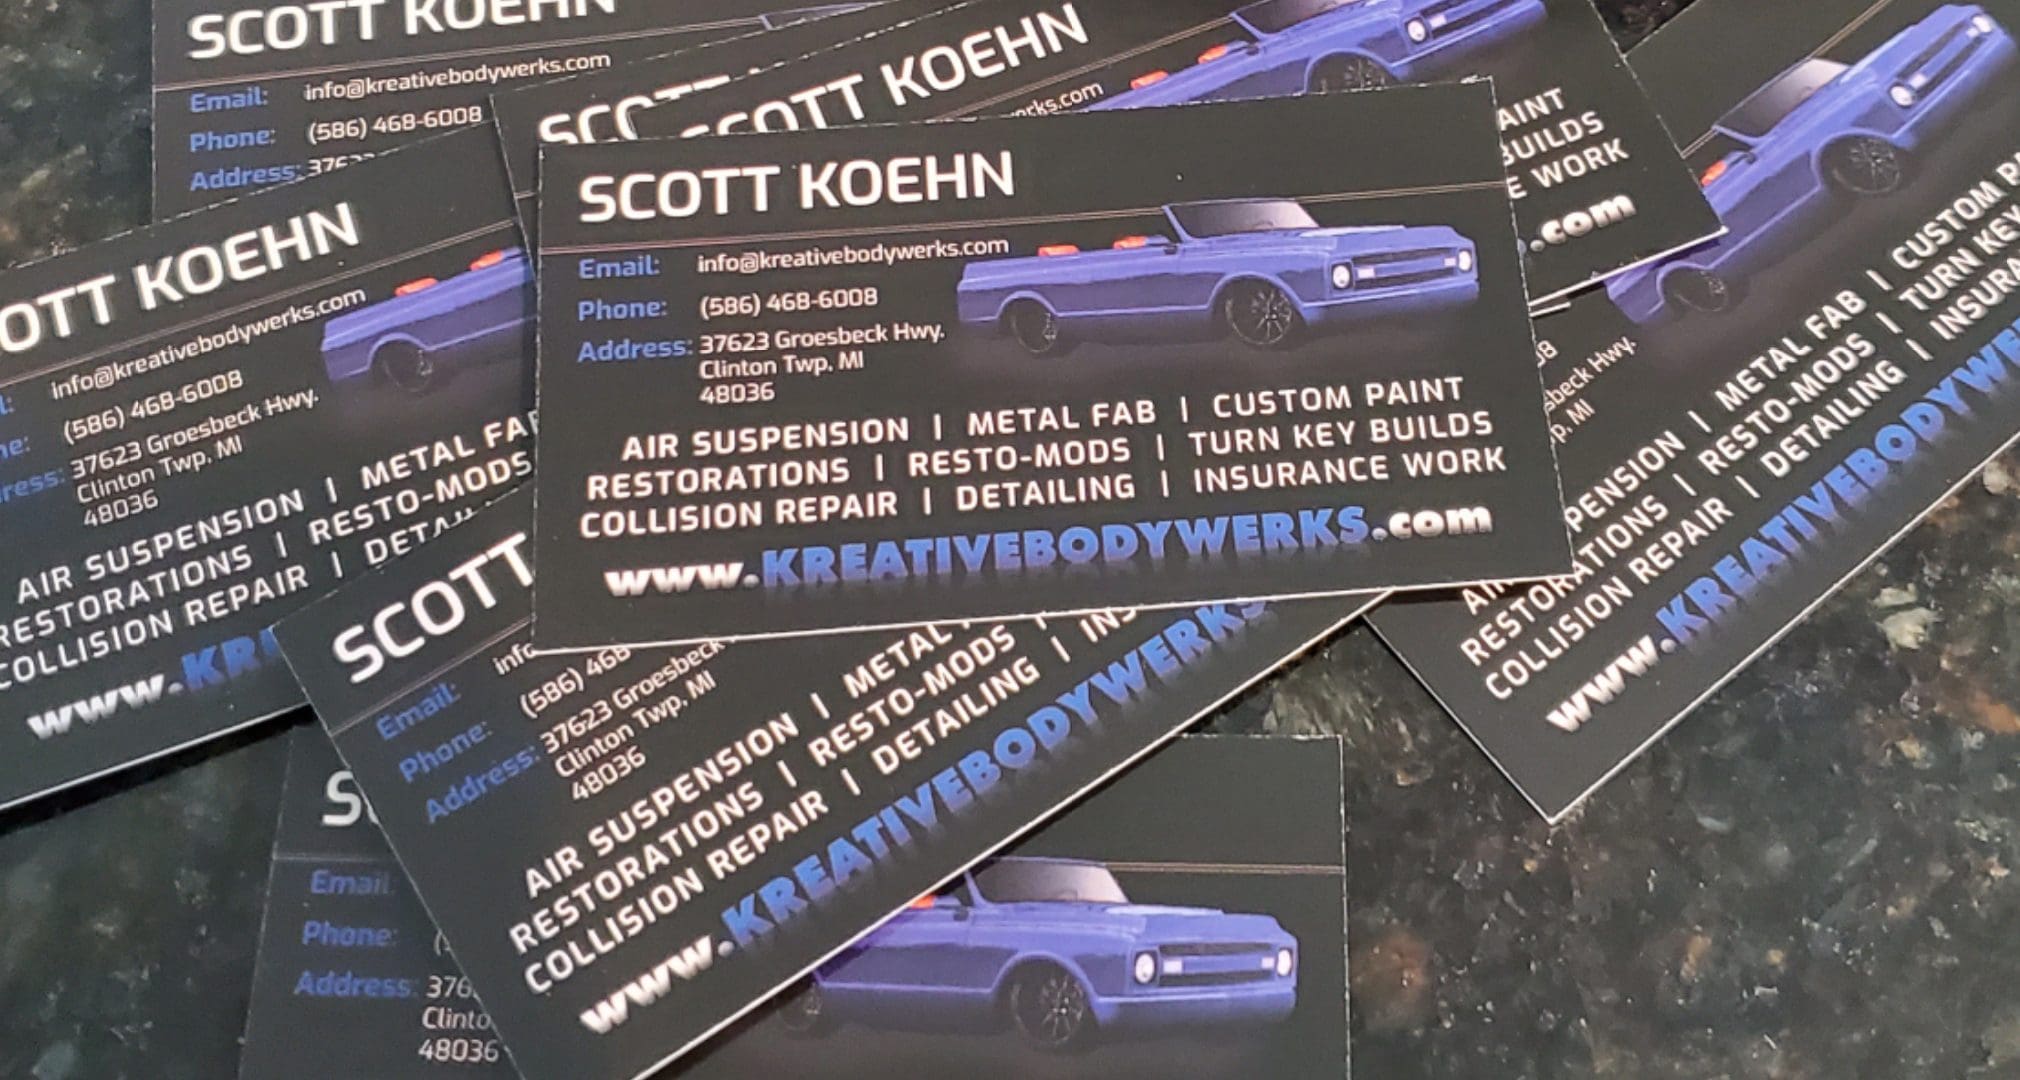 KBW - Gloss Business Cards (6)